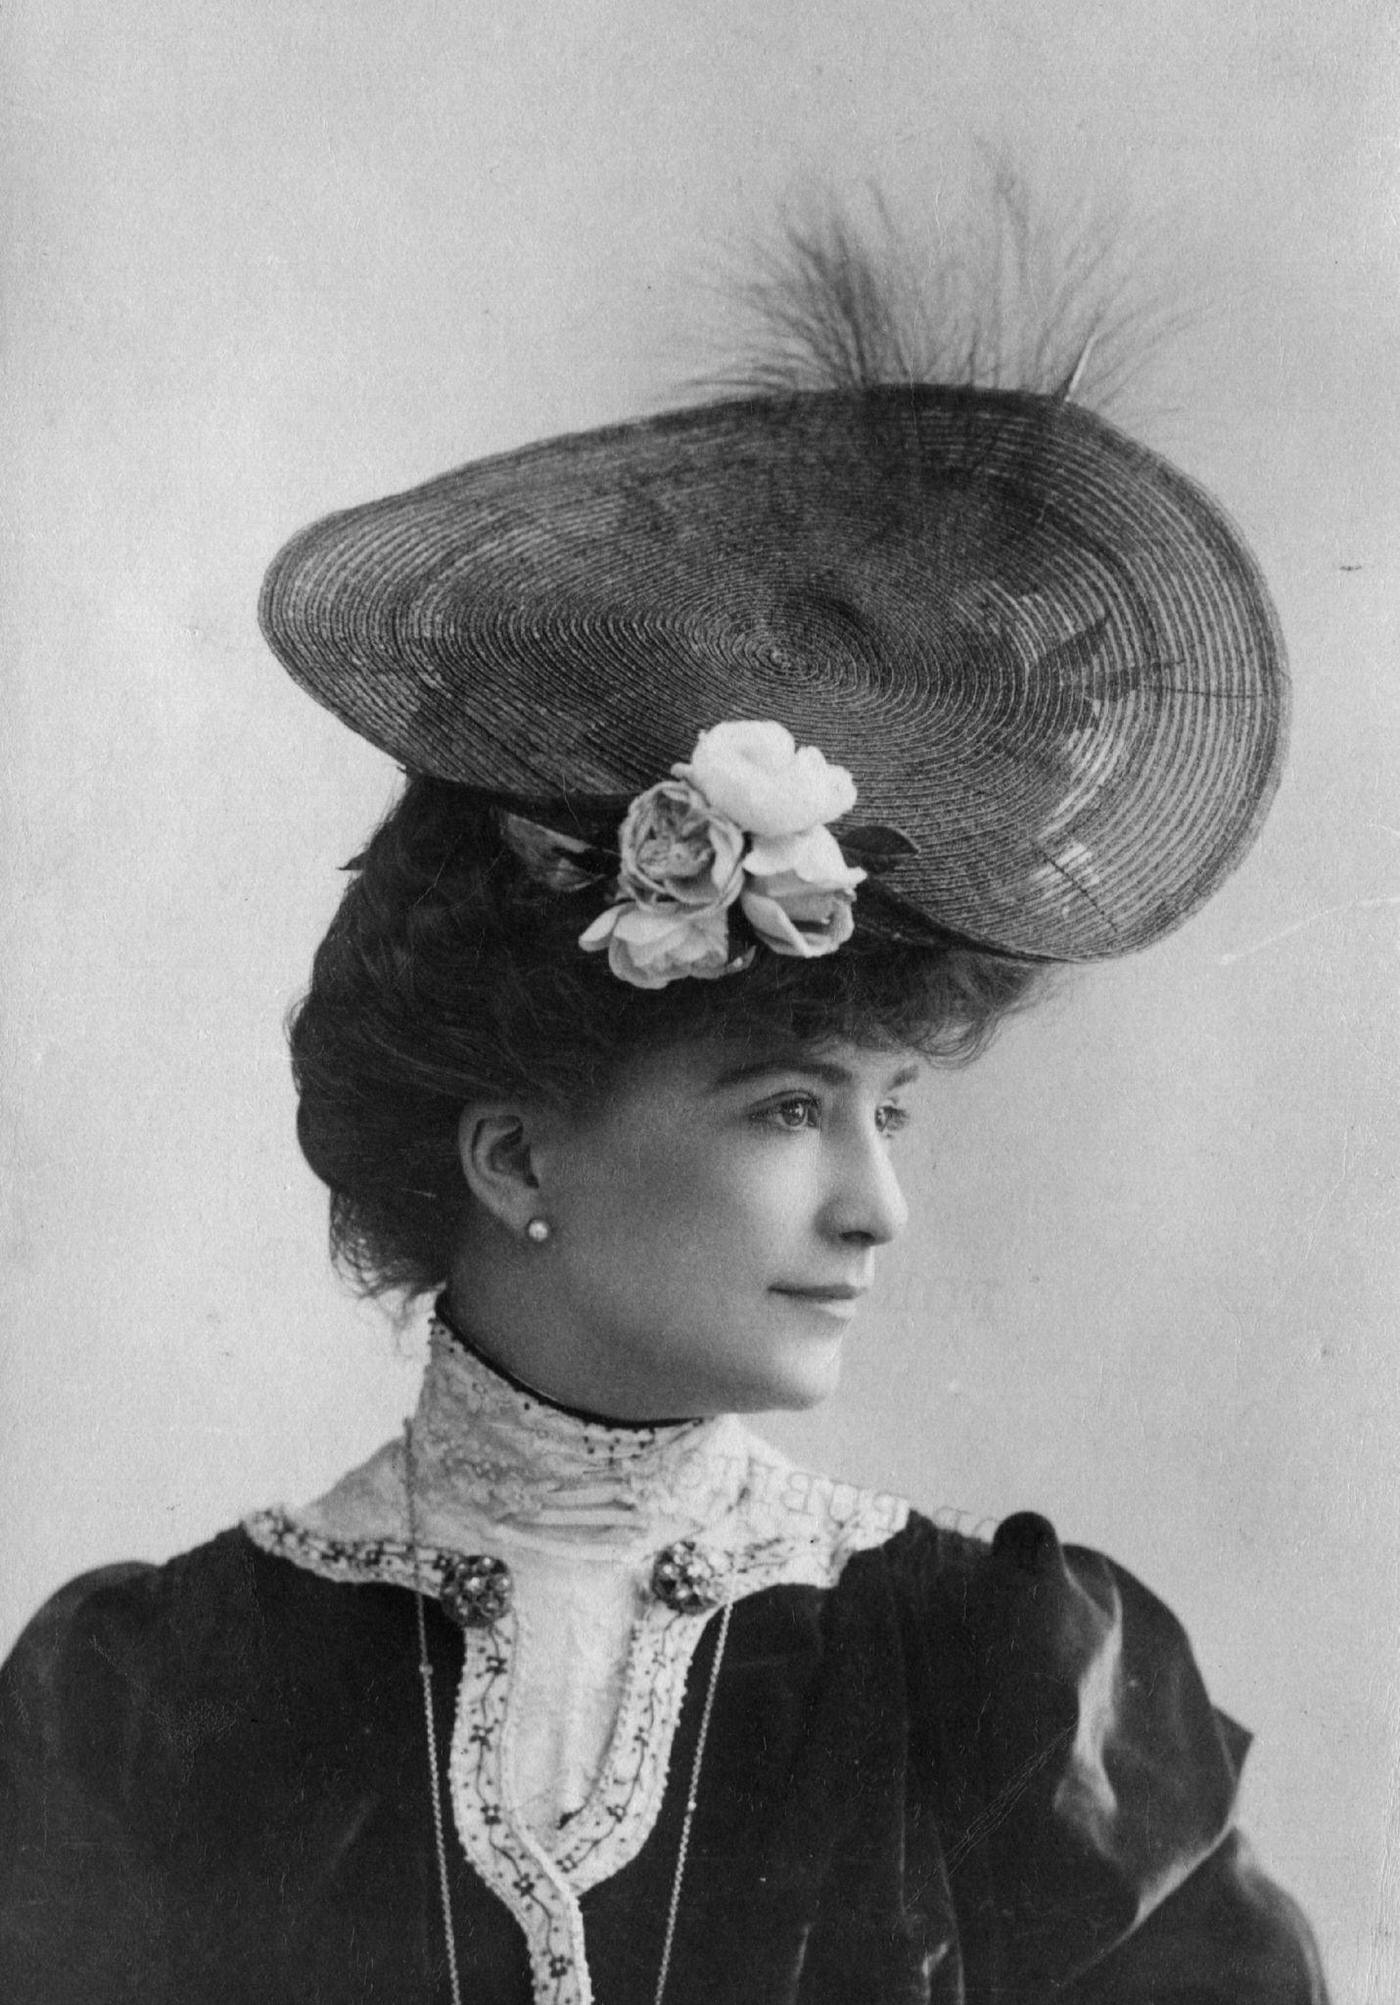 Marie Tempest, a British actress, poses for a portrait in 1903